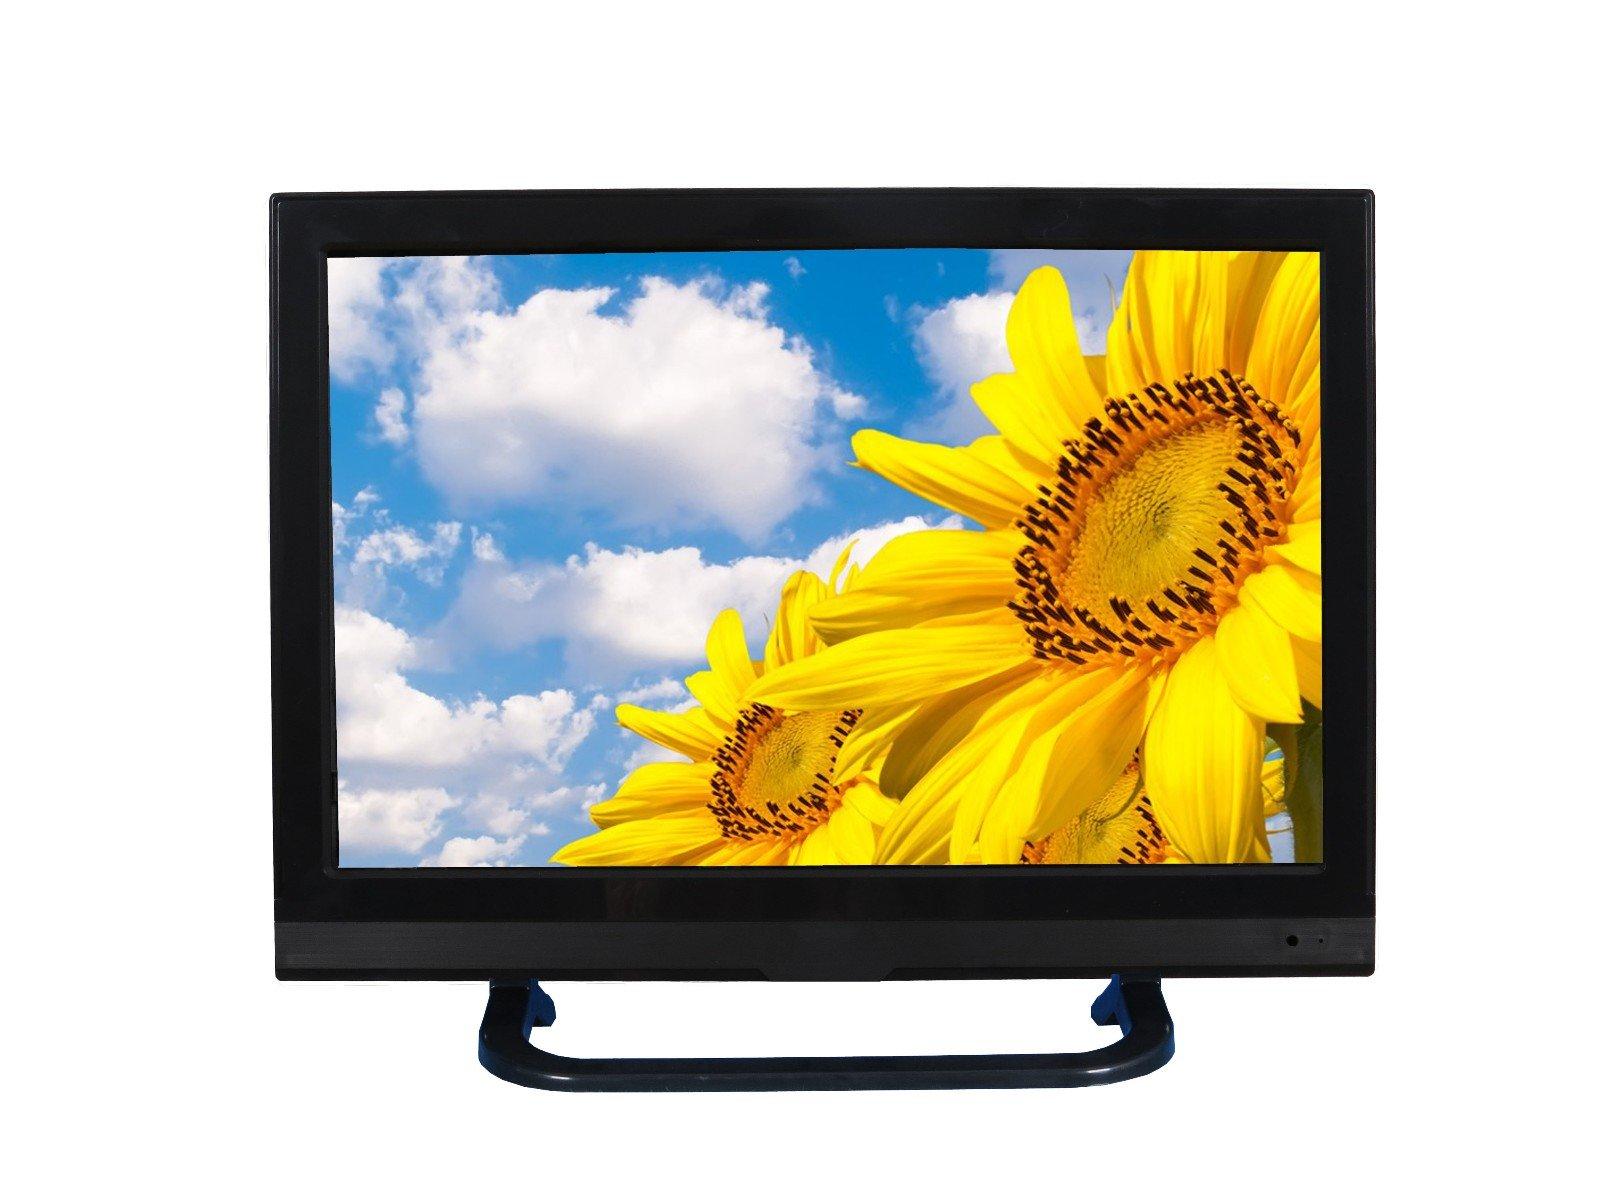 Xinyao LCD factory price 20 inch lcd tv high quality for lcd tv screen